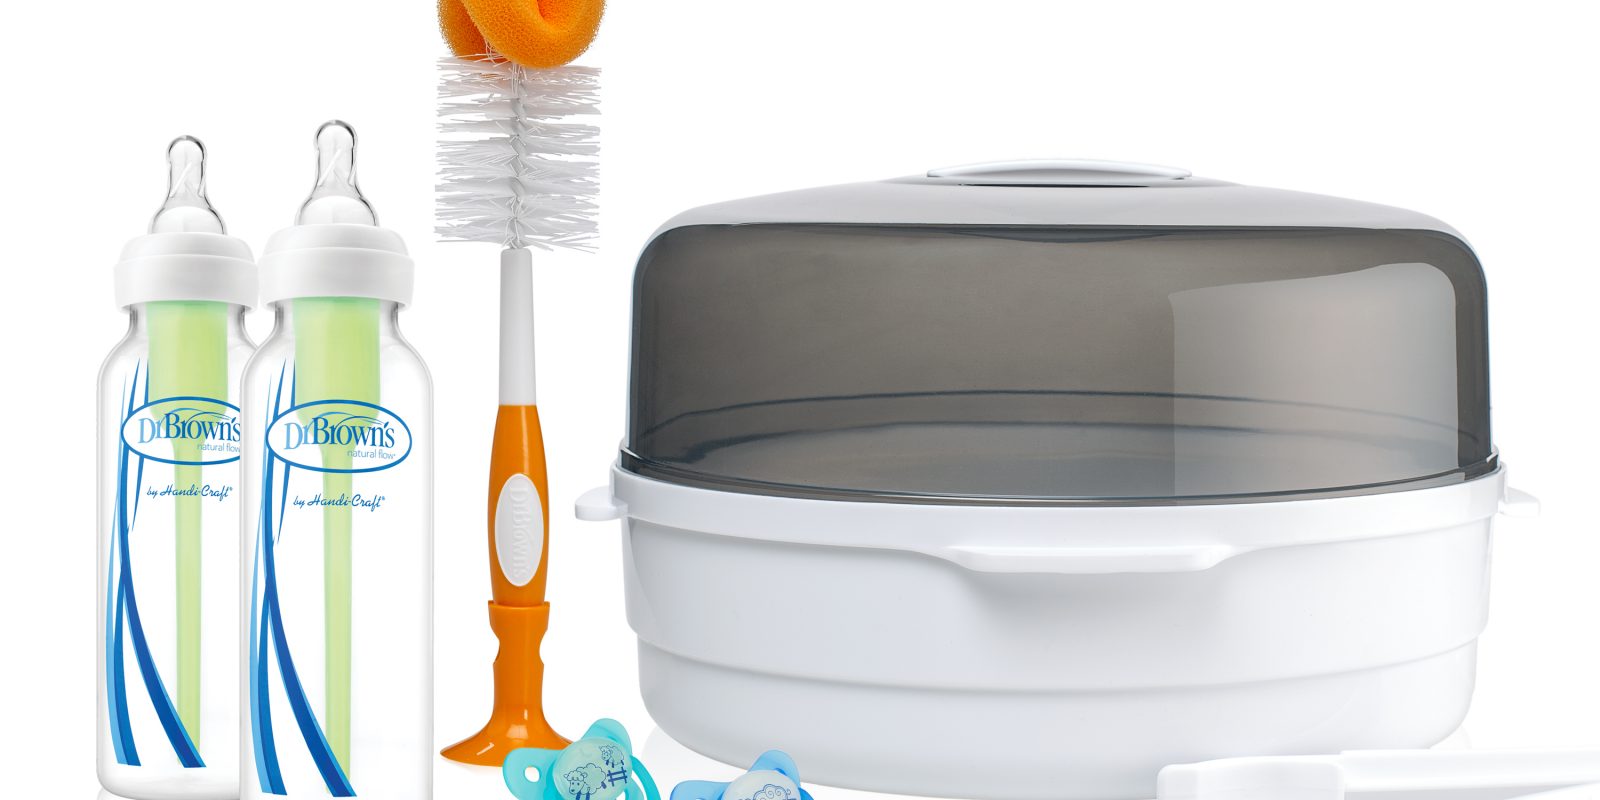 Microwave sterilizer next to bottle brush, pacifiers, and two bottles